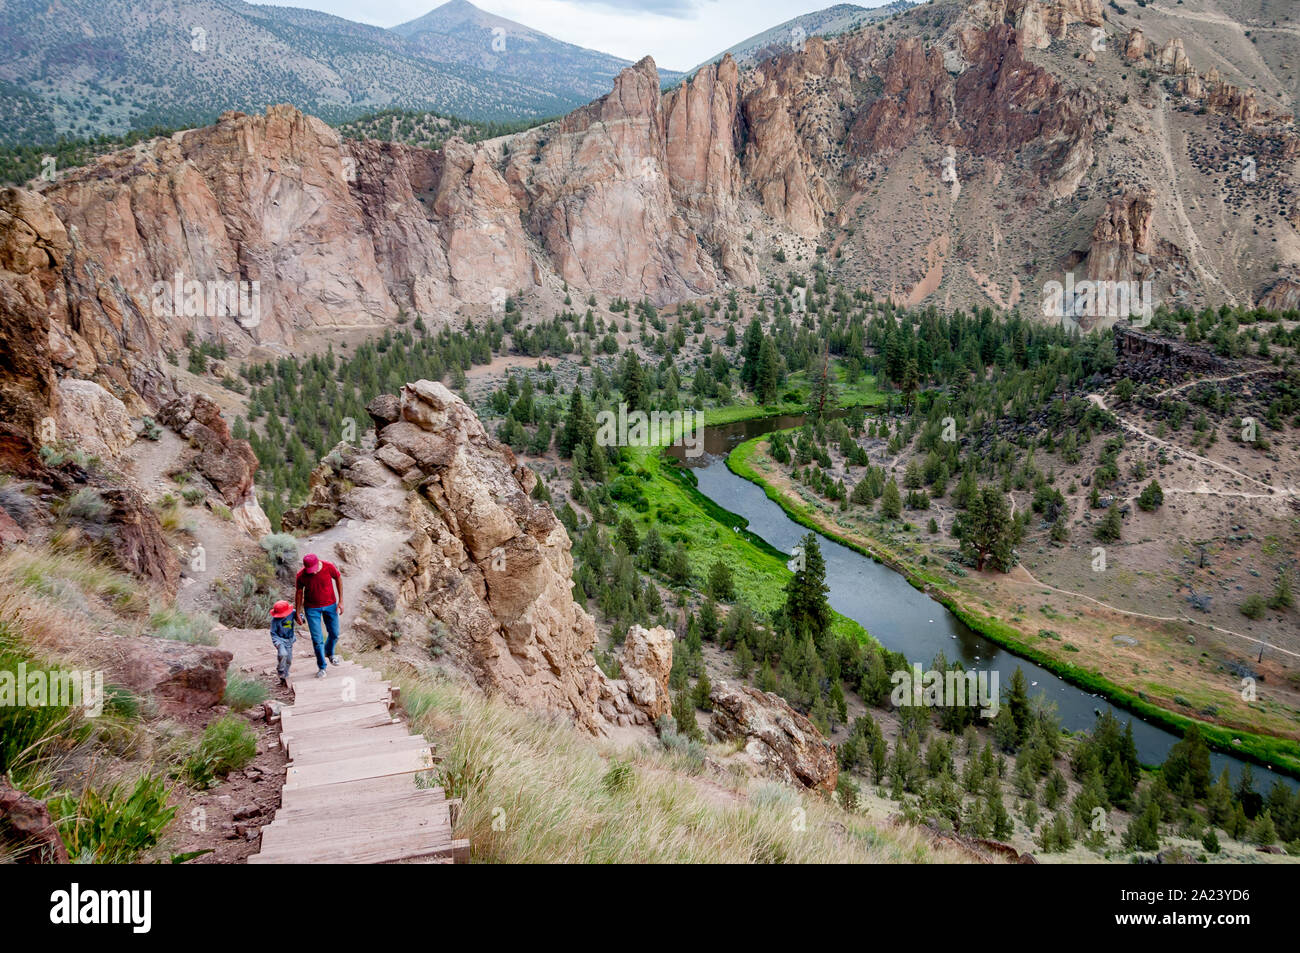 On the Misery Ridge Trail at Smith Rock, a father and young son hike up the steps high above the Crooked River, near Bend, Oregon. Stock Photo